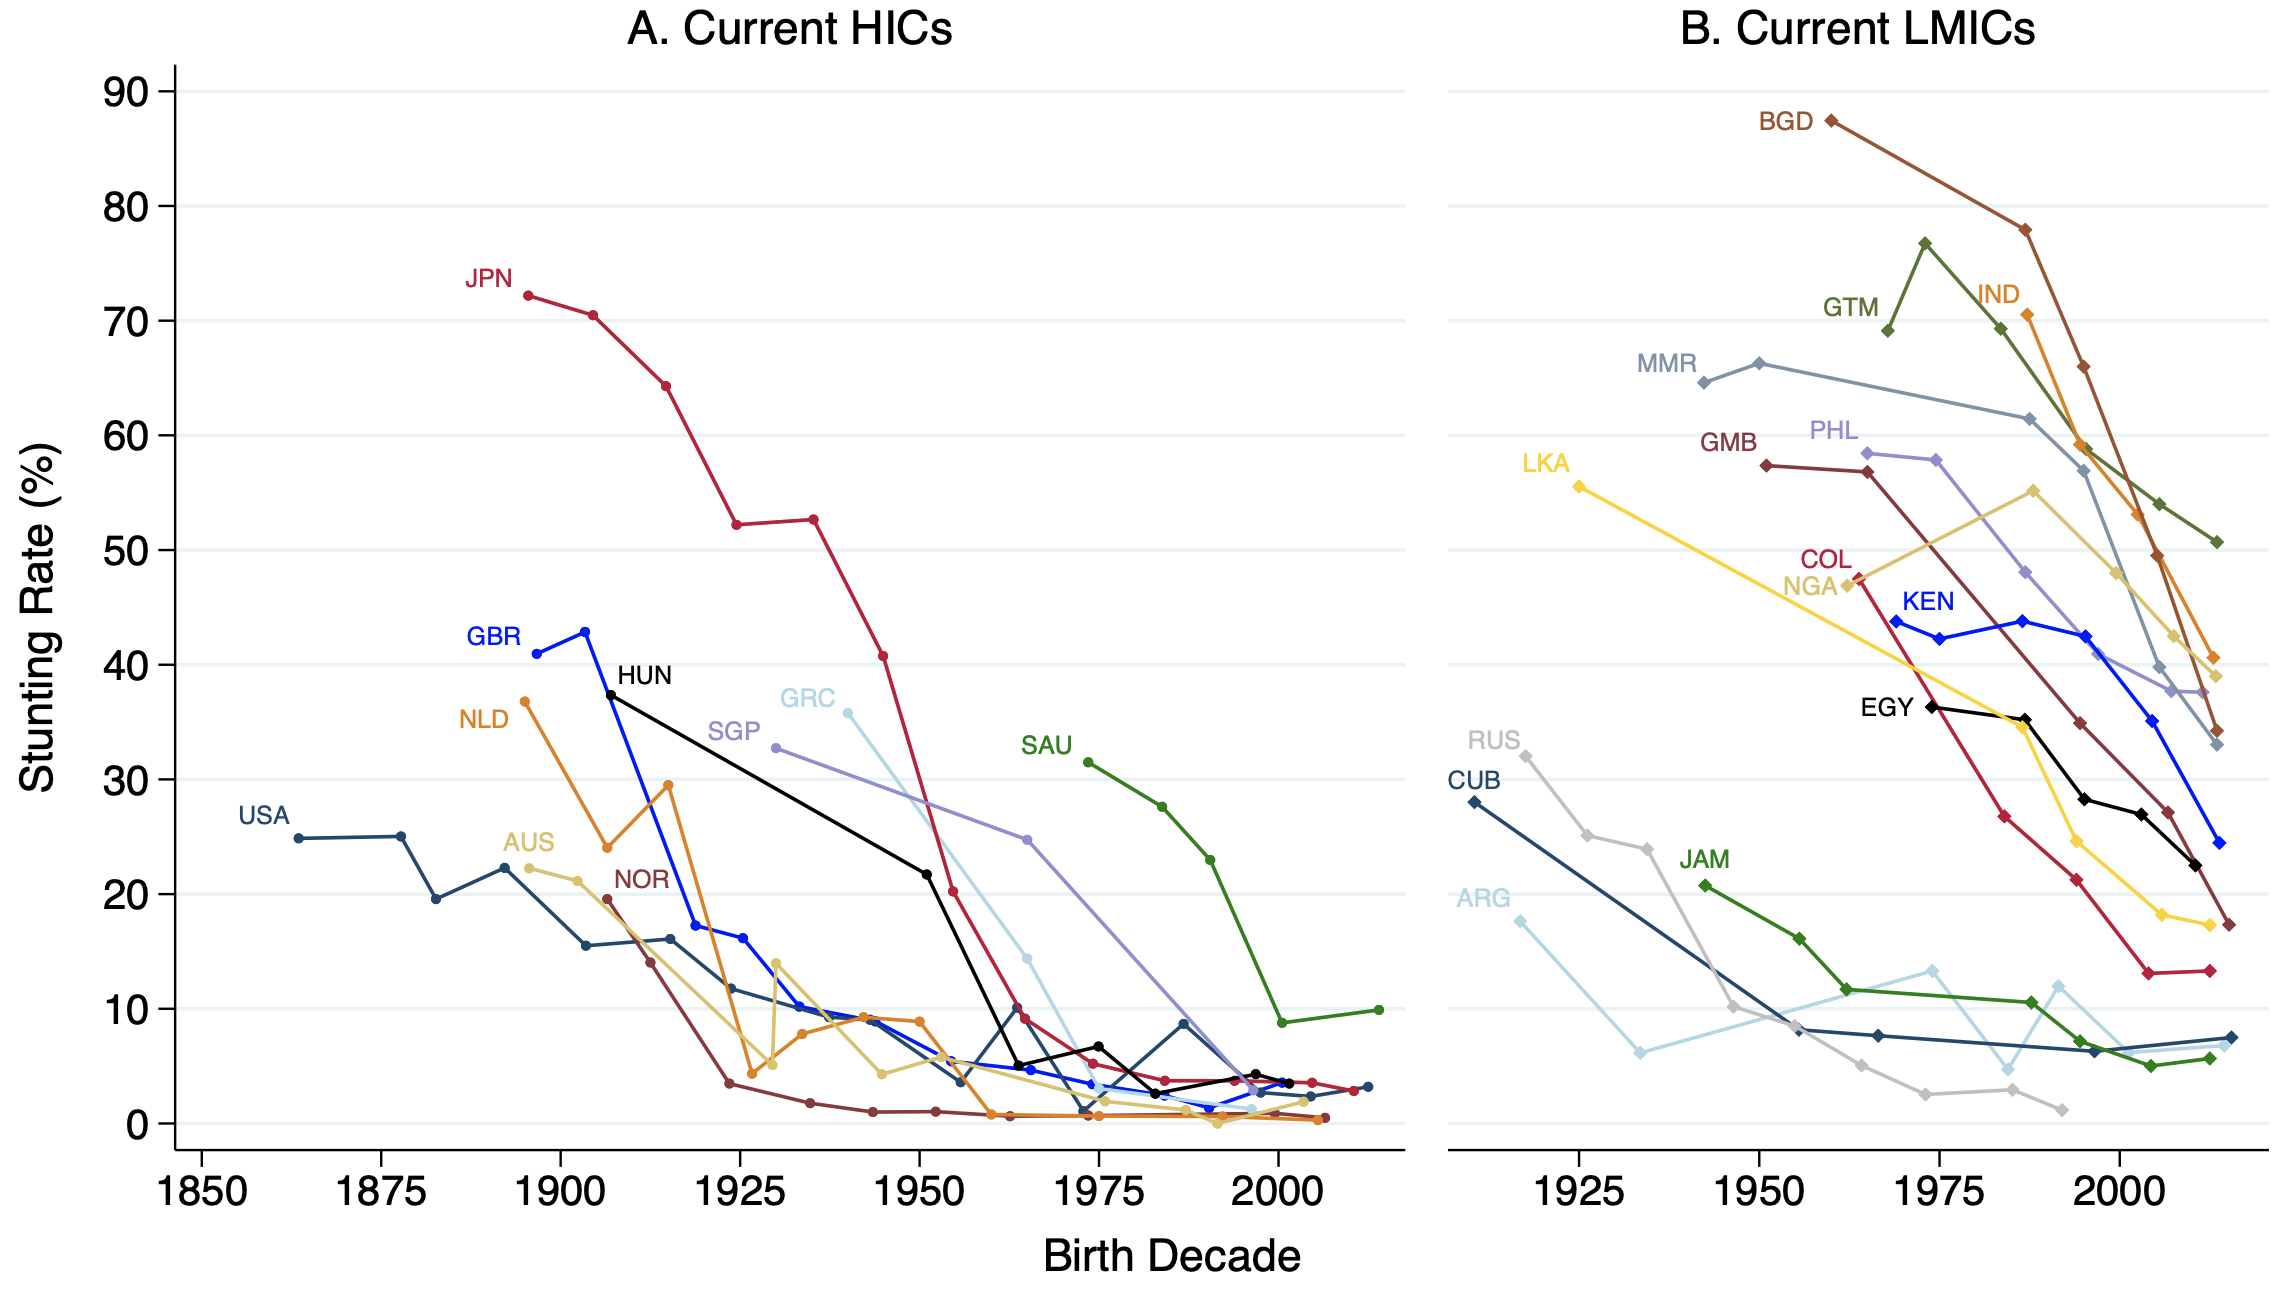 Figure 2 Historical child stunting rates for current high-income countries and low- and middle-income countries